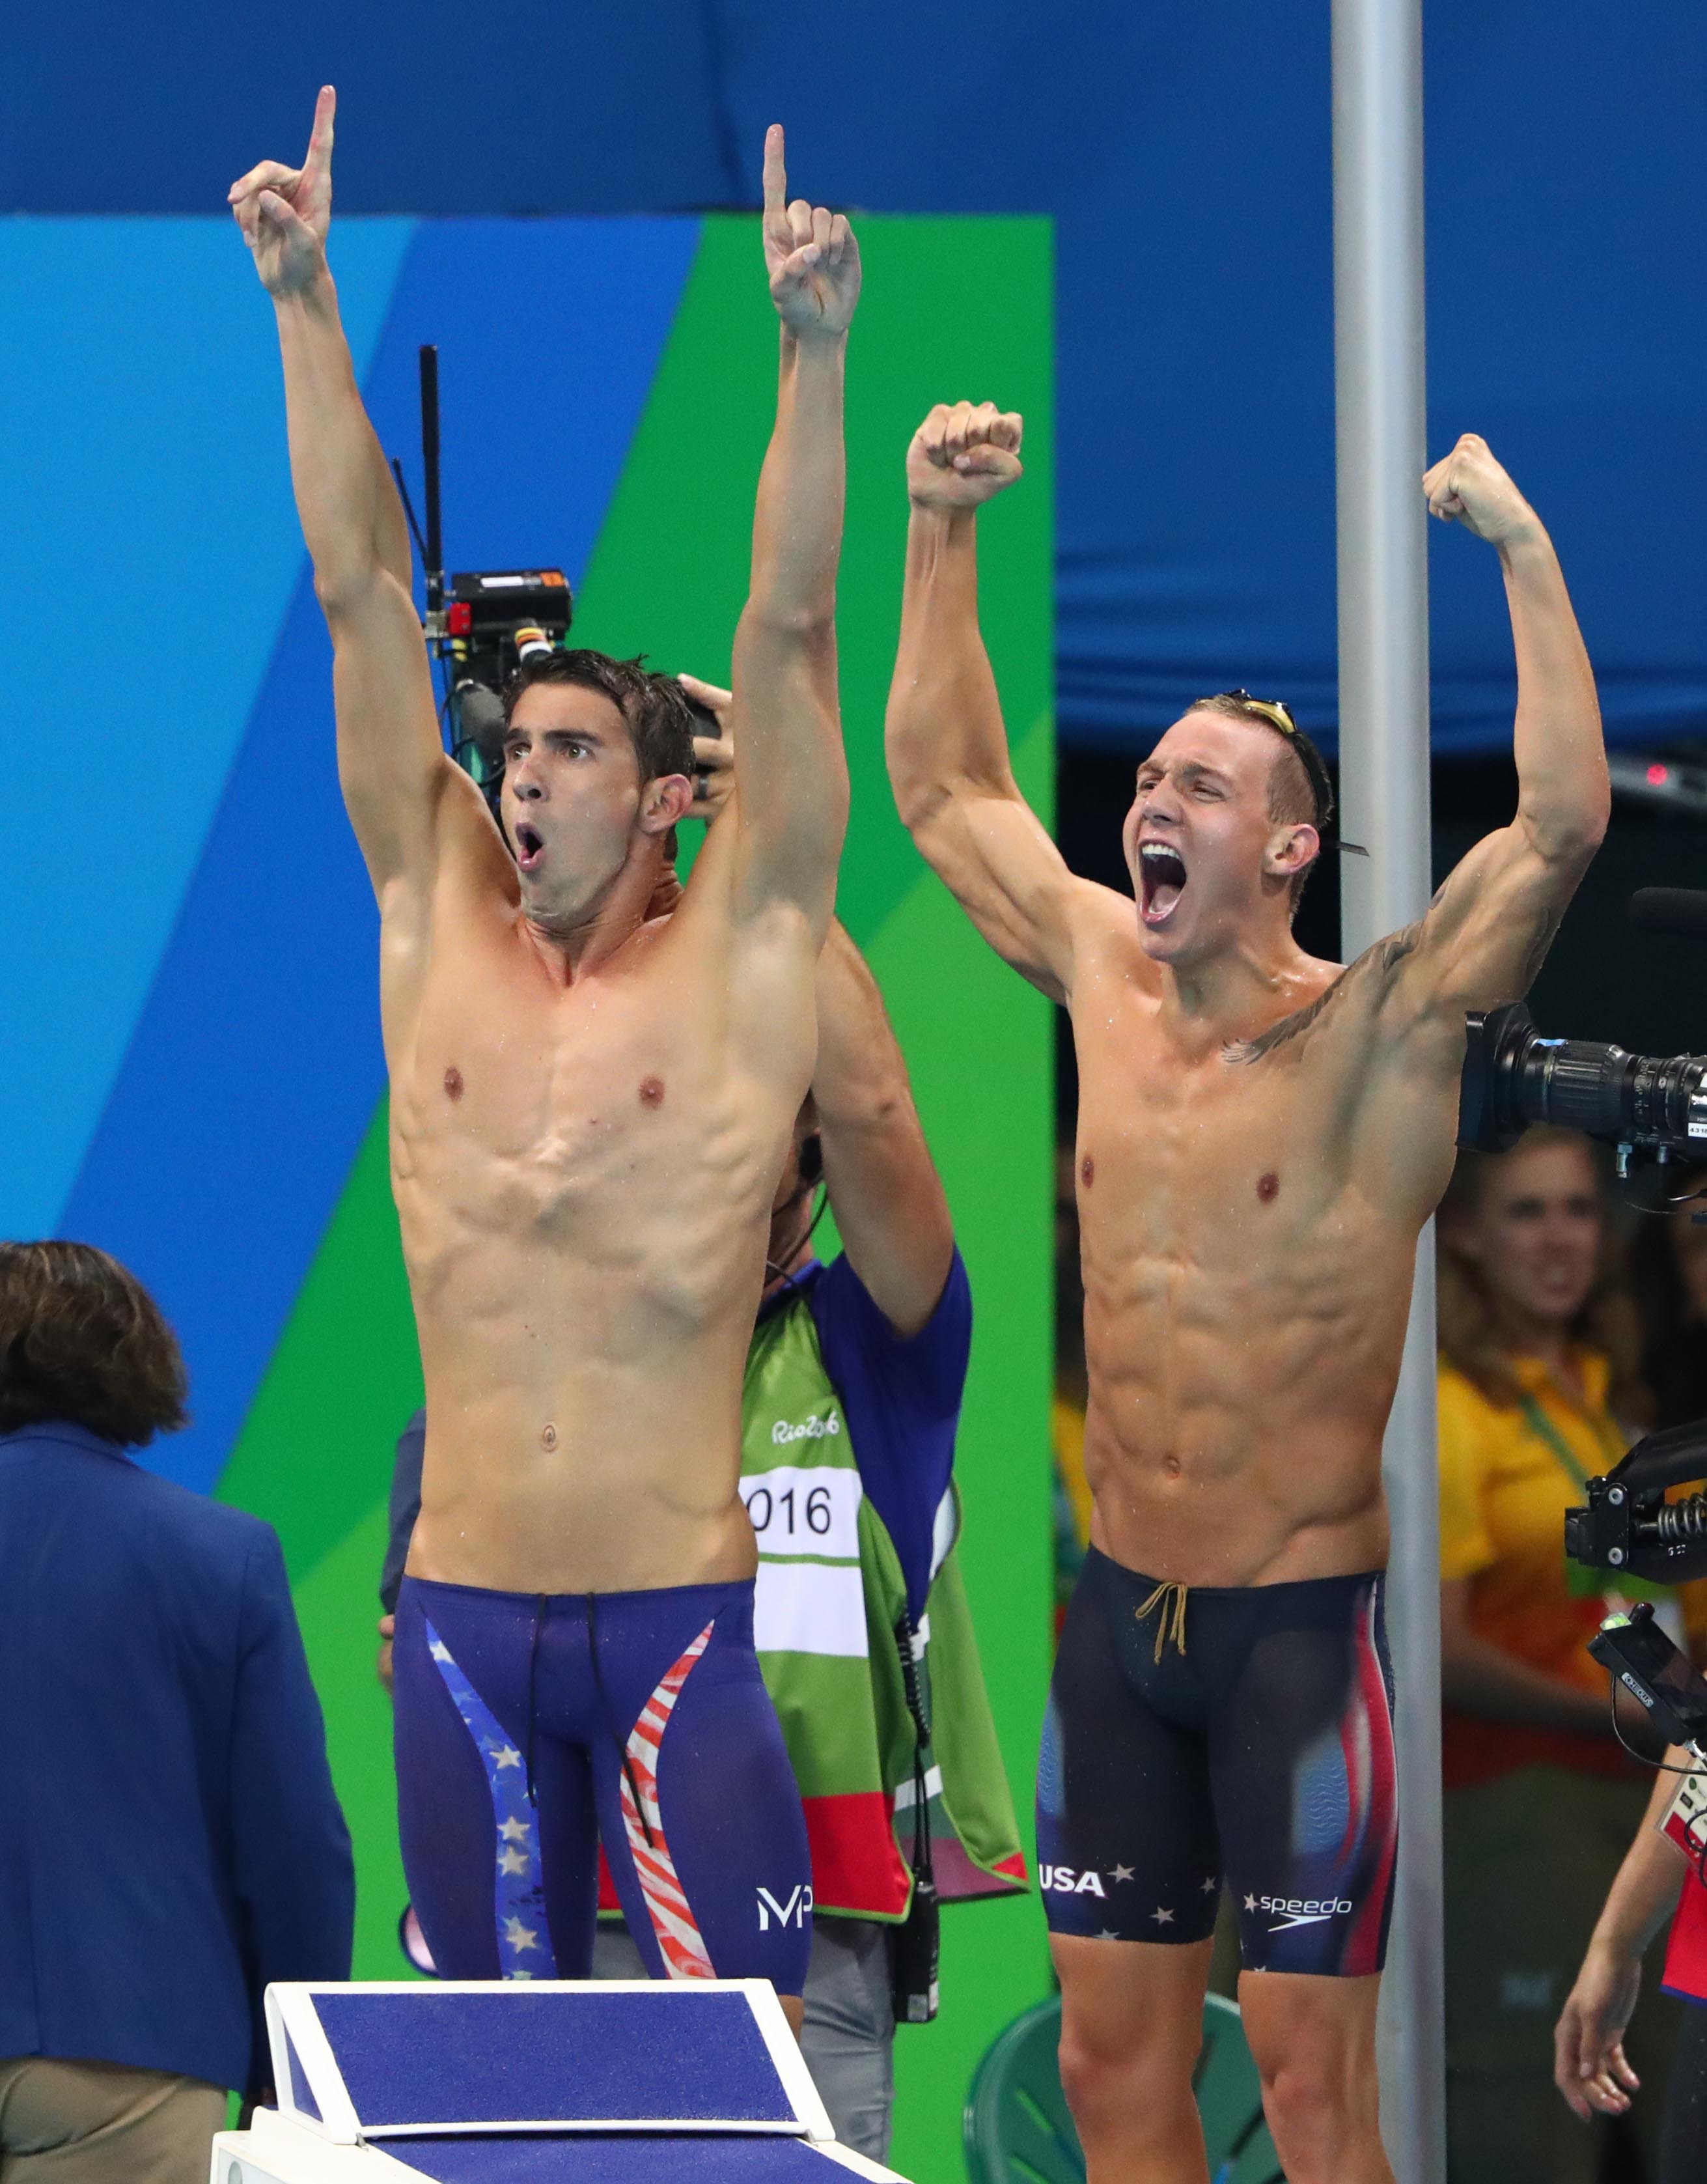 Michael Phelps and Caeleb Dressel (USA) celebrate after winning the men's 4x100m freestyle relay final in the Rio 2016 Summer Olympic Games at Olympic Aquatics Stadium on Aug.  7, 2016.